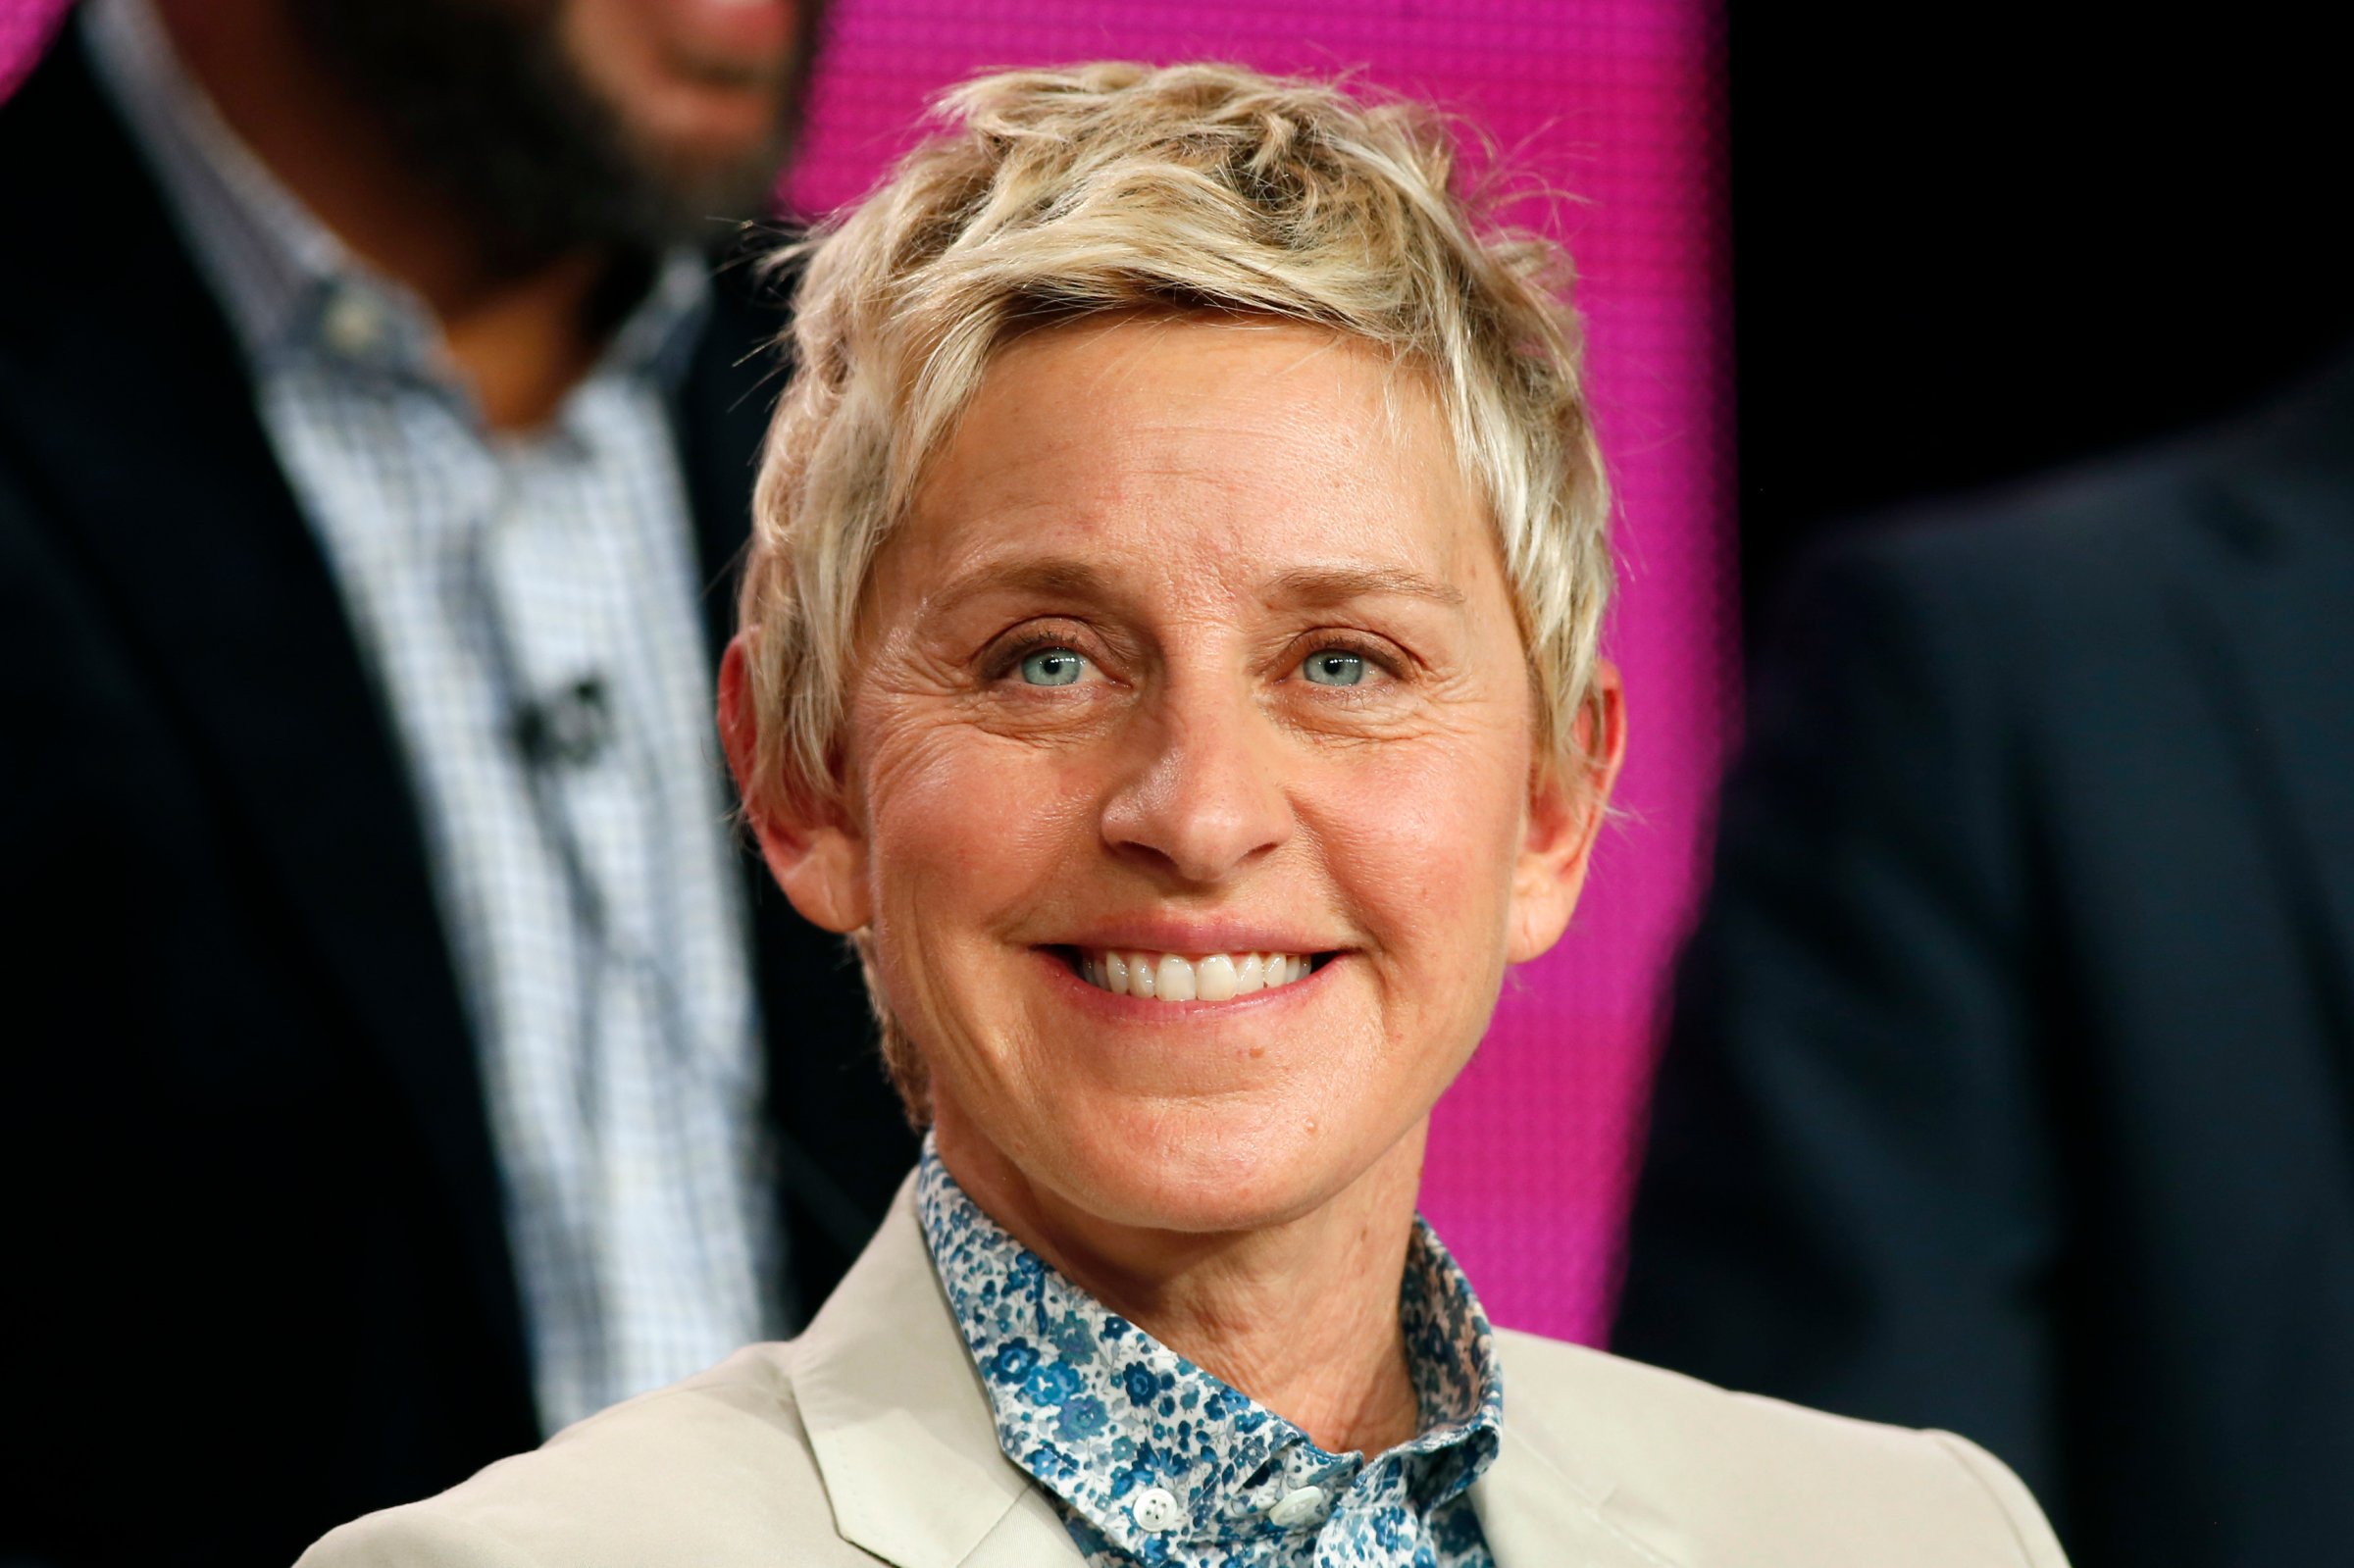 Executive Producer Ellen DeGeneres speaks about the NBC television show "One Big Happy" during the TCA presentations in Pasadena, California, January 16, 2015